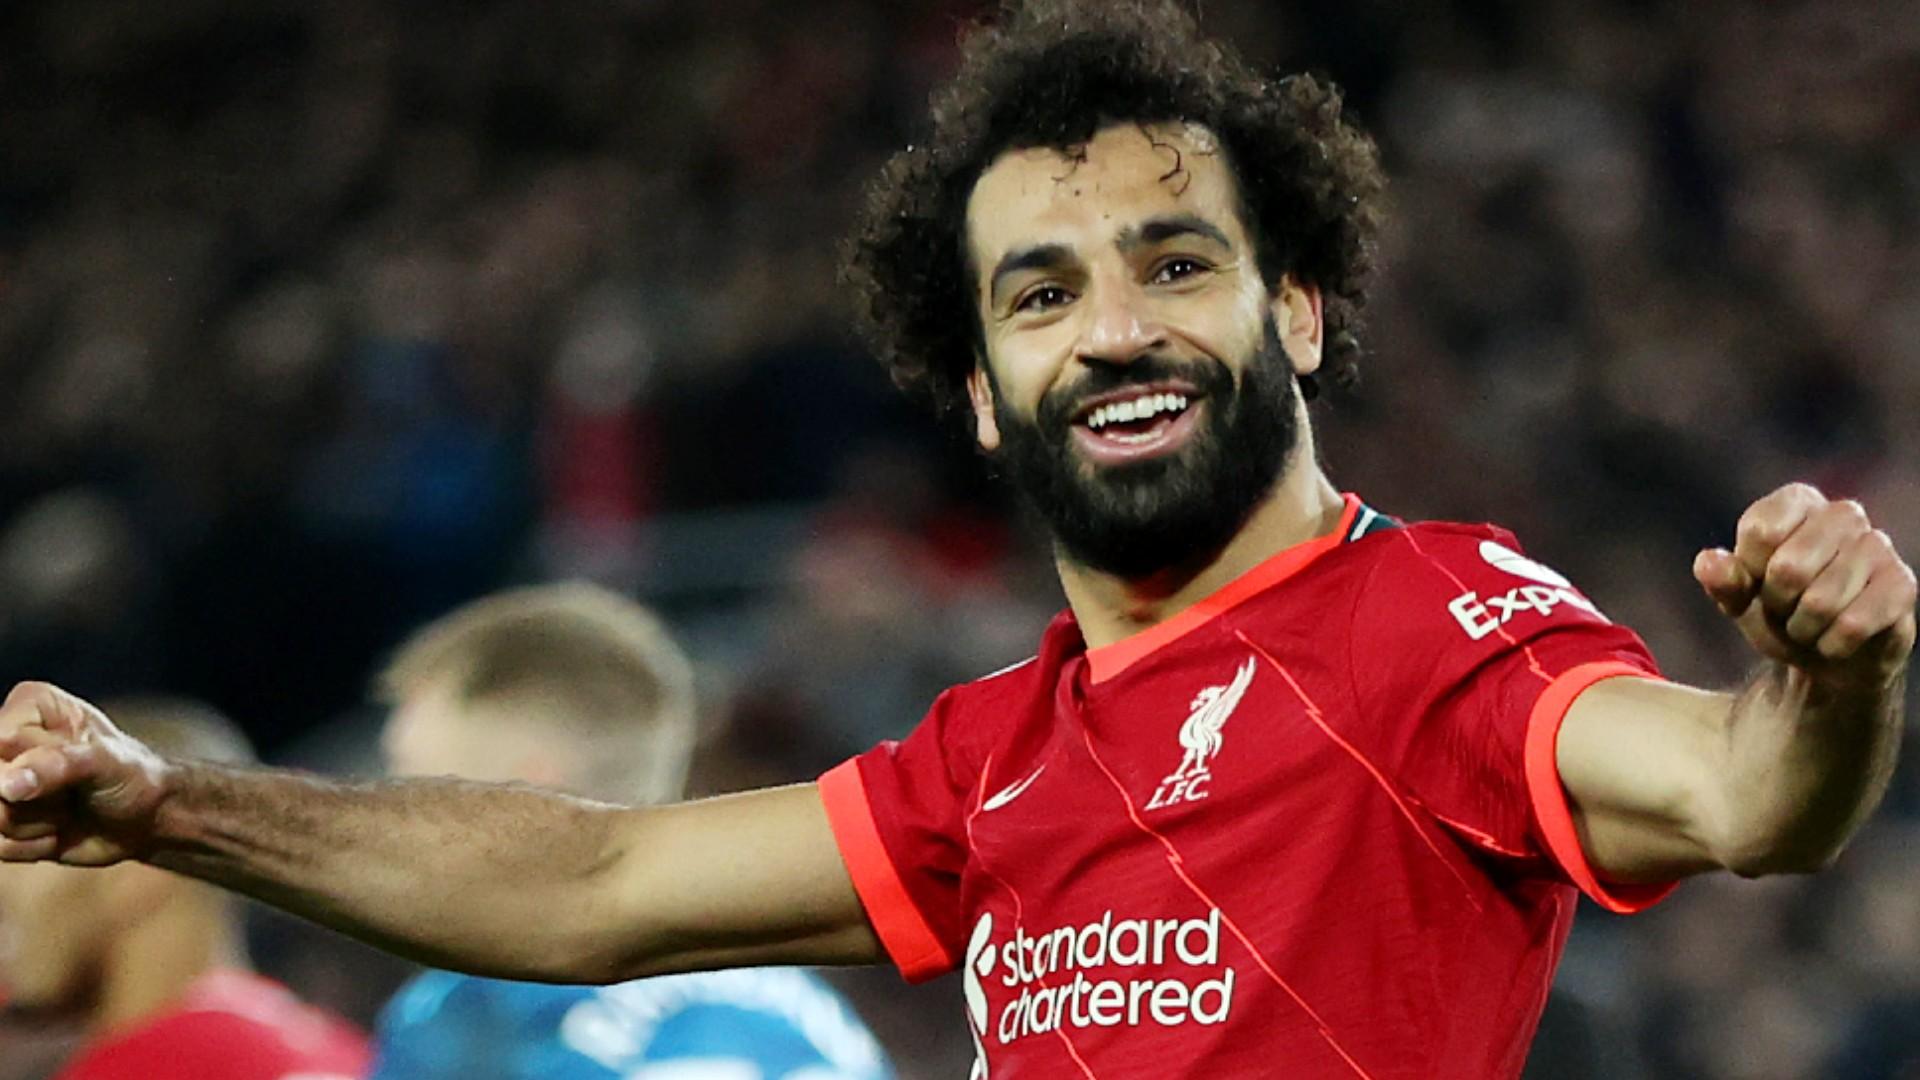 Liverpool legend names the one player whose departure would be a 'bigger blow' than Salah - Context and Background